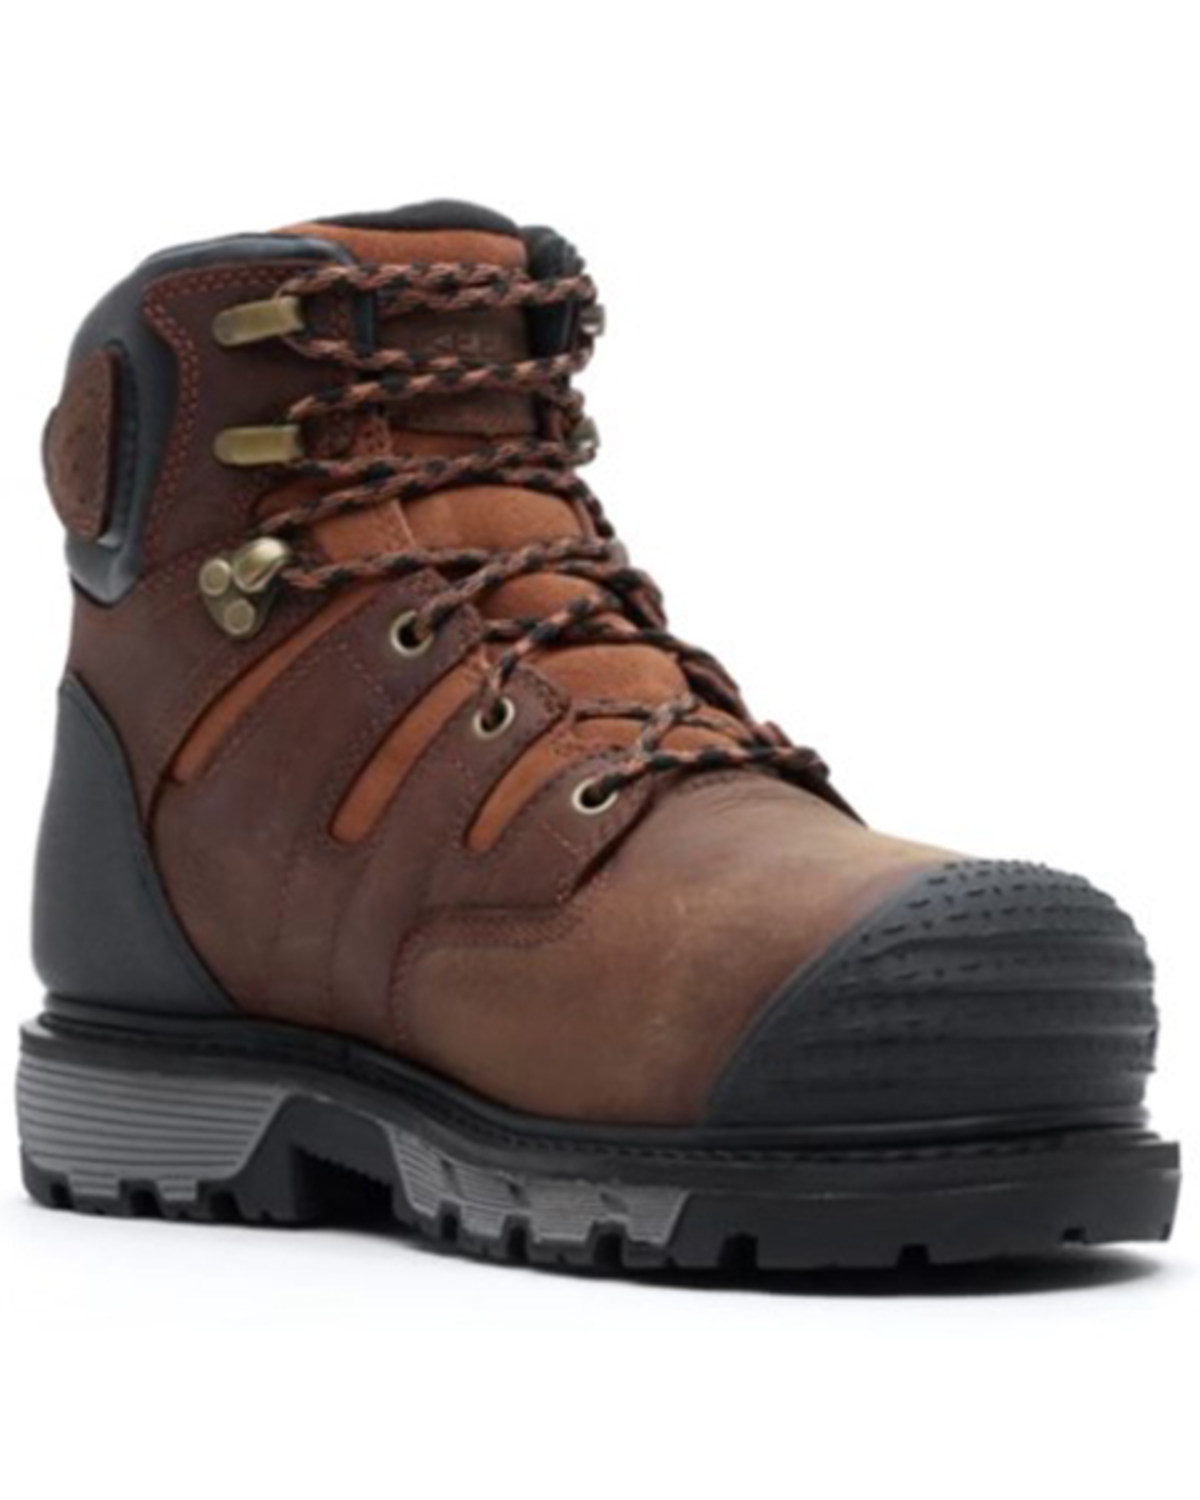 Keen Men's Camden 6" Lace-Up Work Boots - Carbon Toe